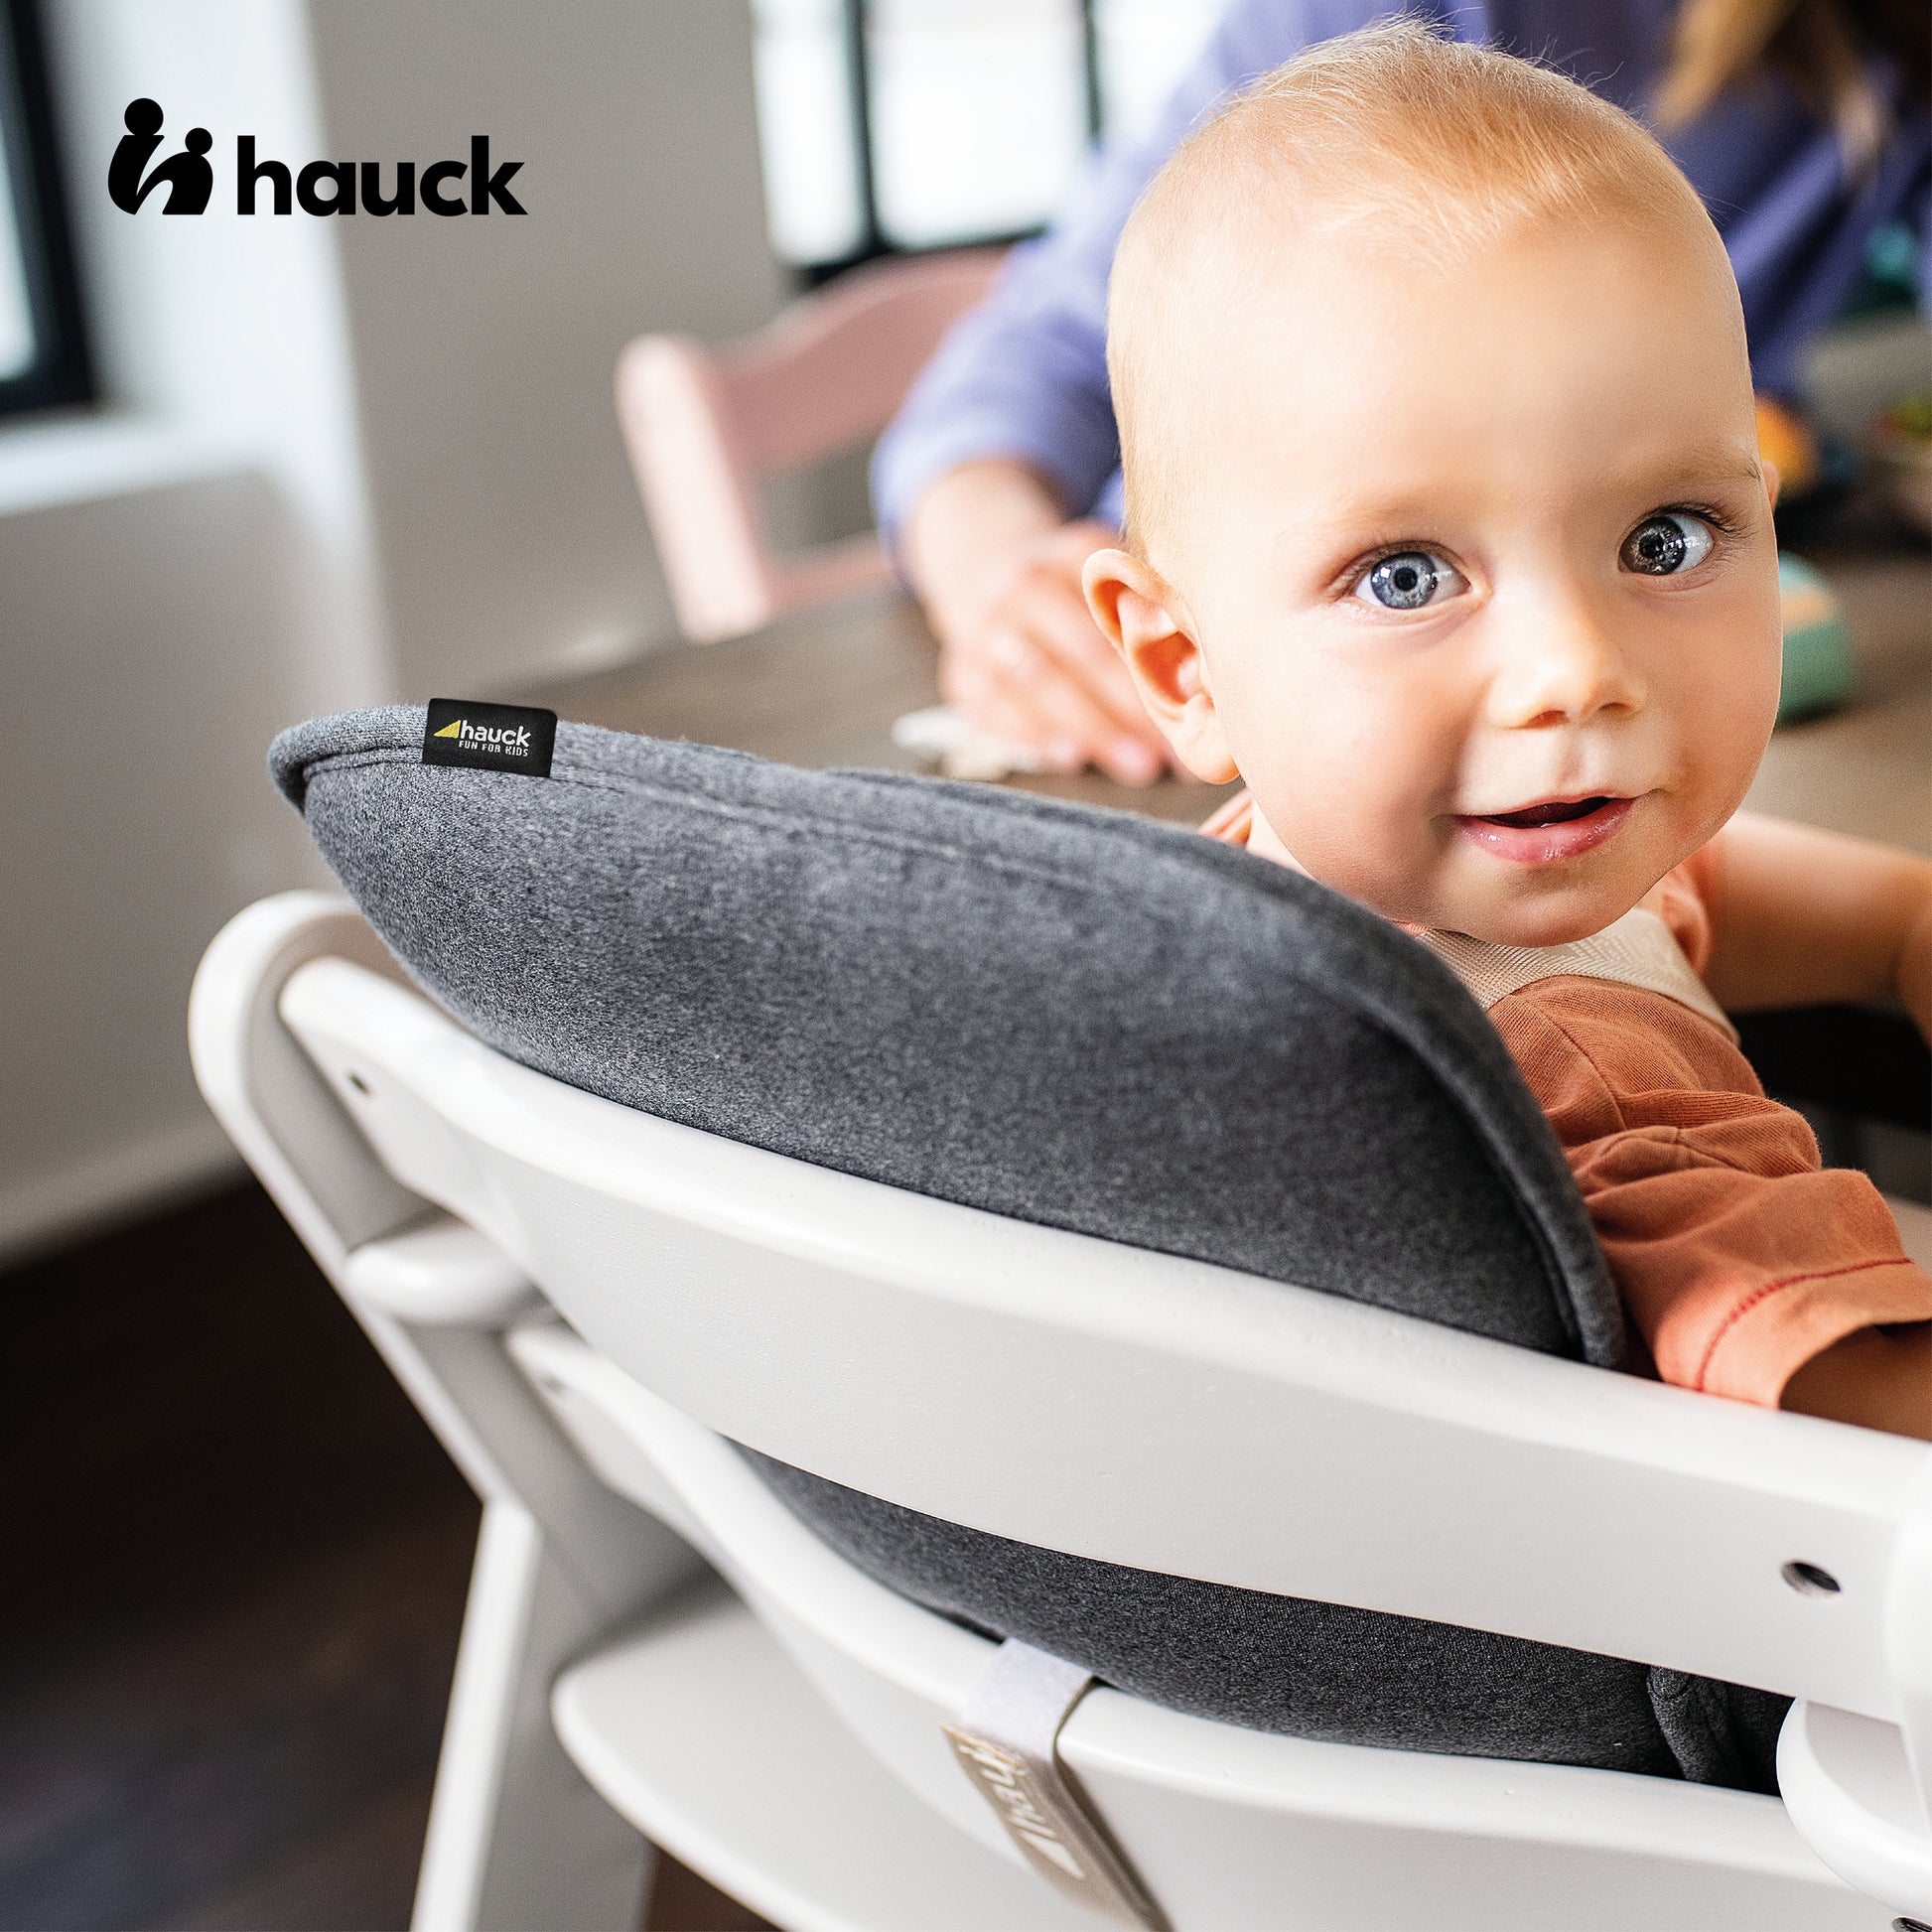  hauck AlphaPlus Grow Along Wooden High Chair Seat with Grey  Removable Tray Table and Deluxe Seat Cushion Pad for Babies 6 Months and Up  : Clothing, Shoes & Jewelry